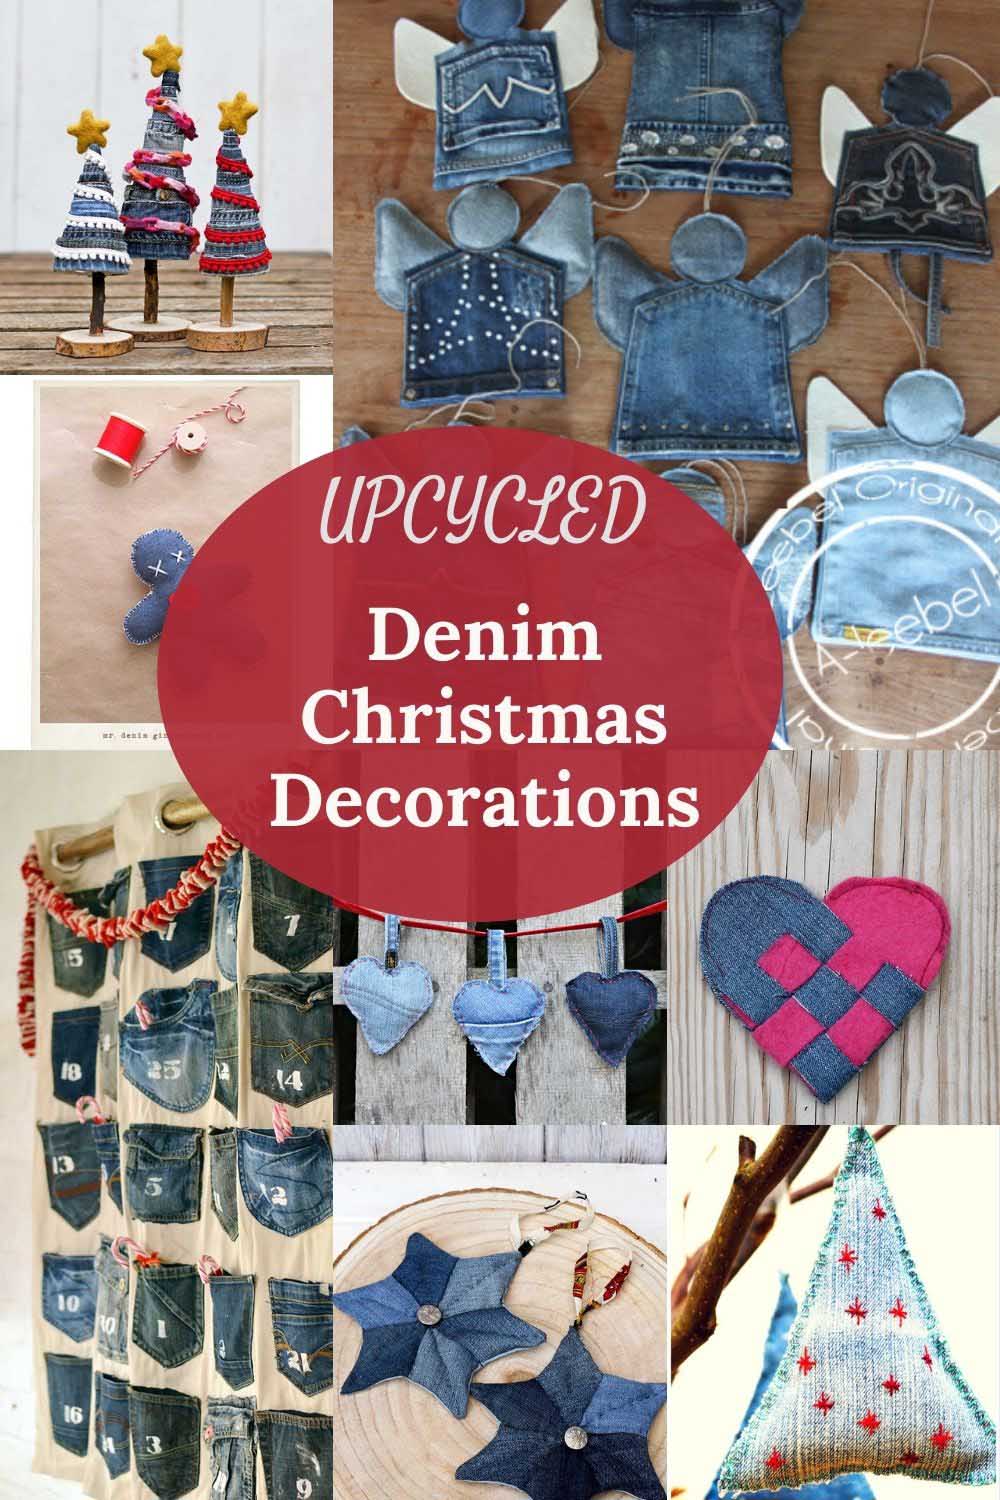 upcycled_denim_christmas_decortaions